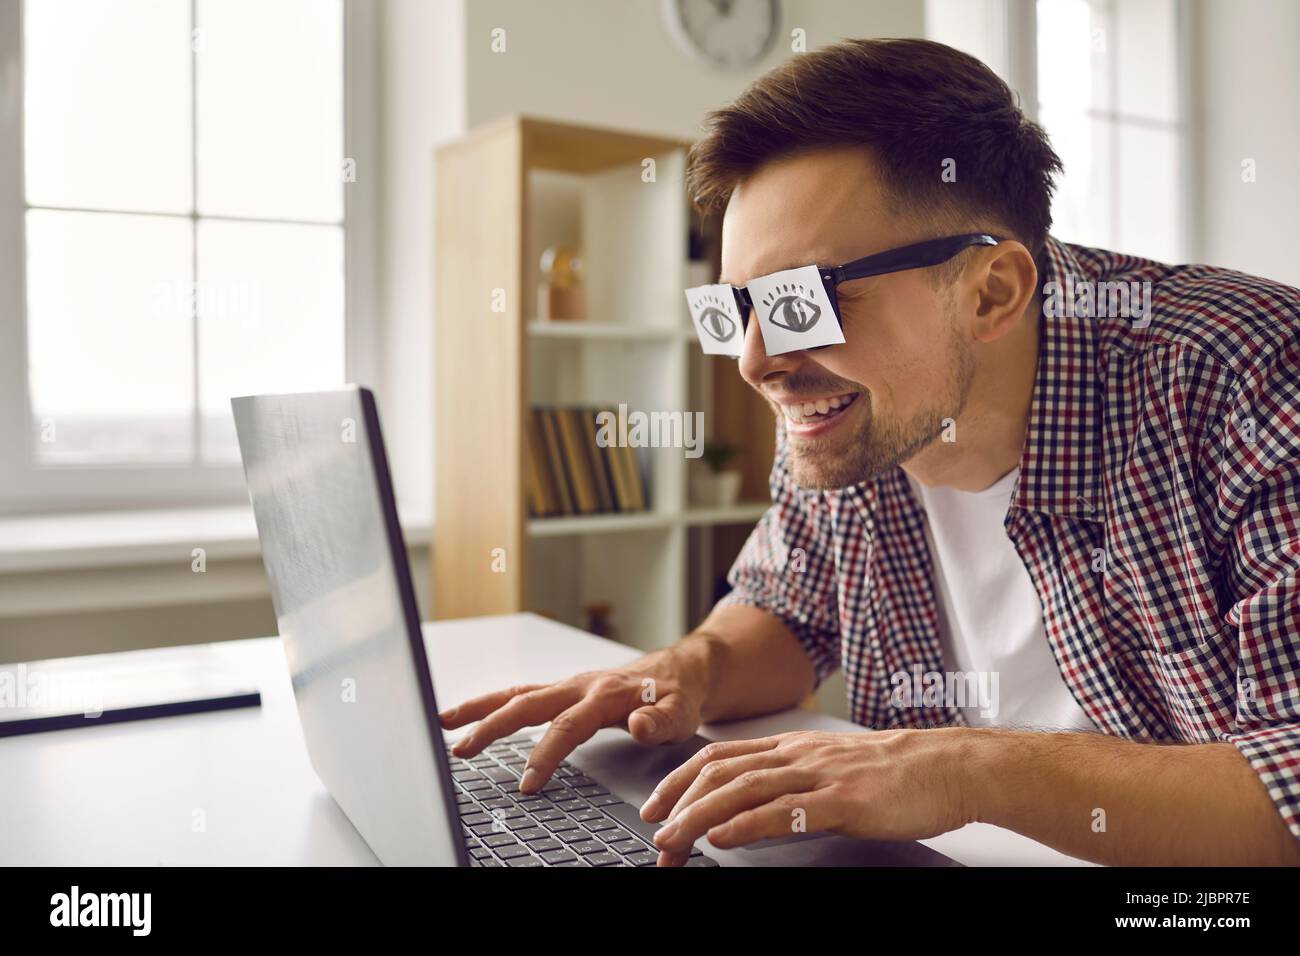 Funny weird sleepy guy with paper stickers on eyes pretending to be working on laptop Stock Photo